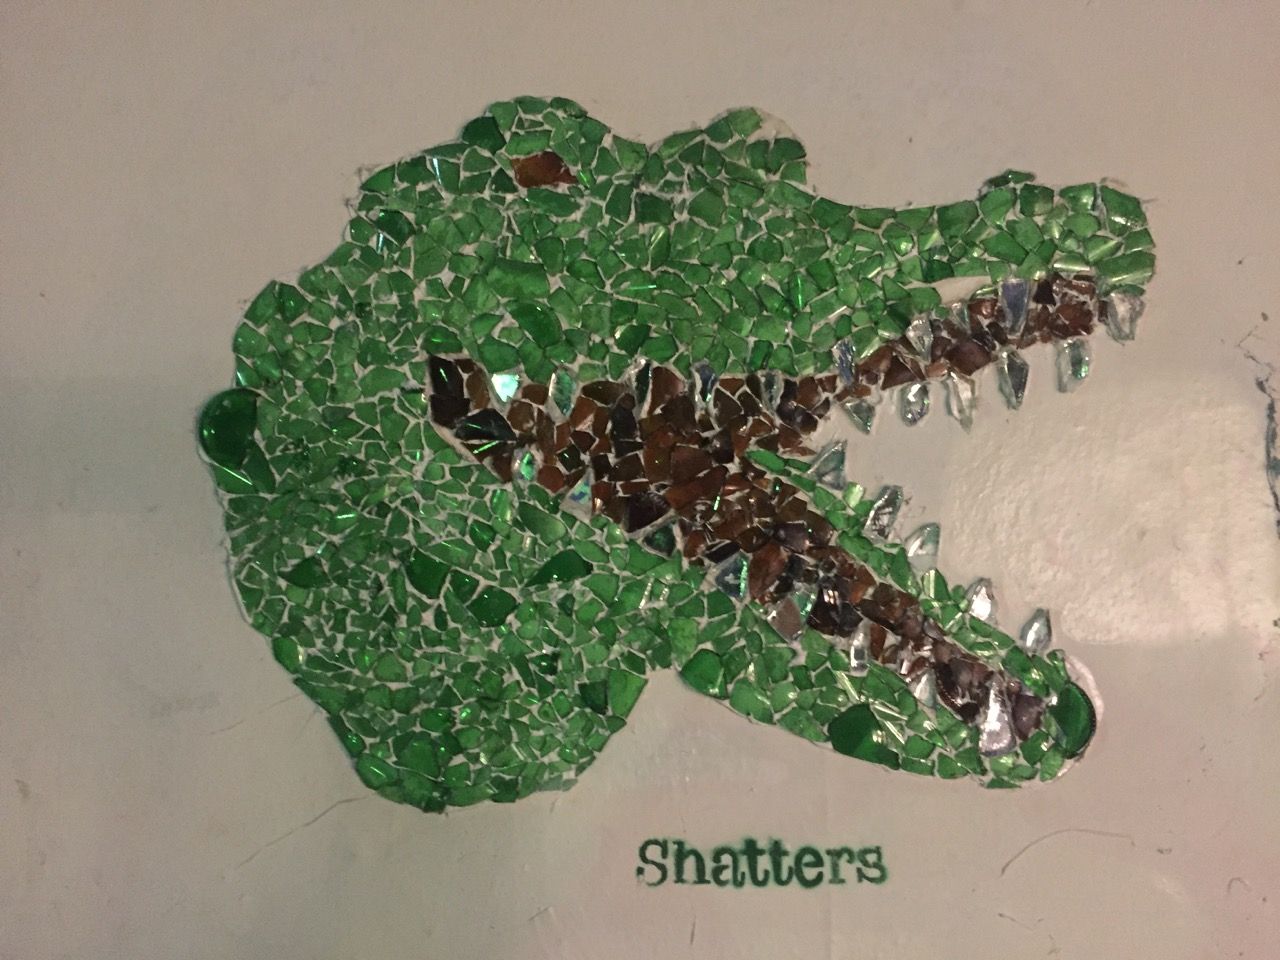 Art depicting an alligator. It has a caption that says "Shatters"